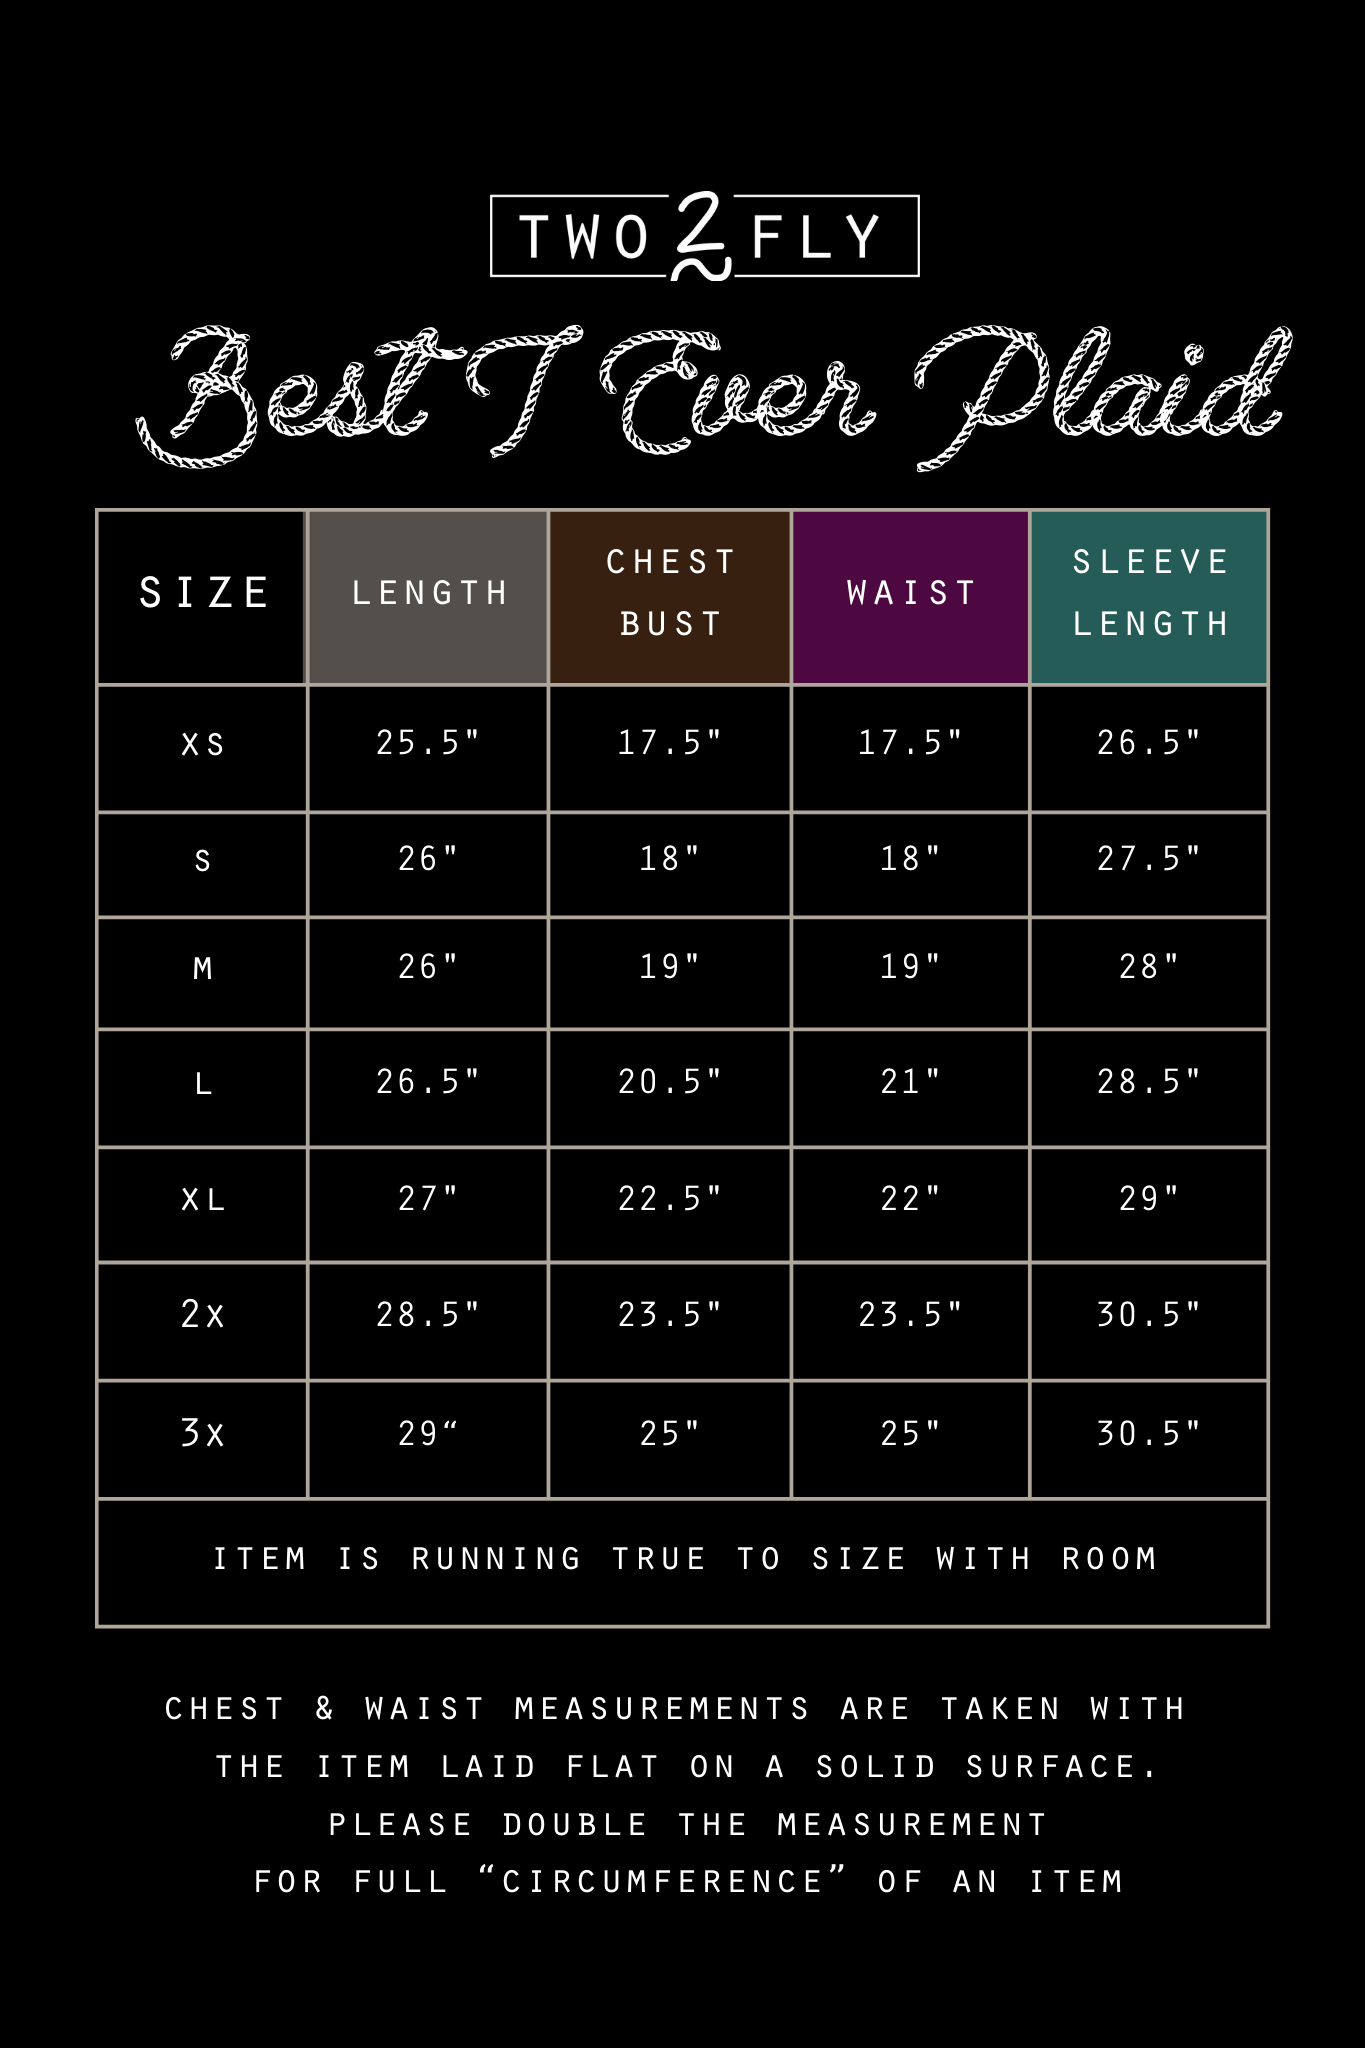 THE BEST I EVER PLAID [missing sizes]